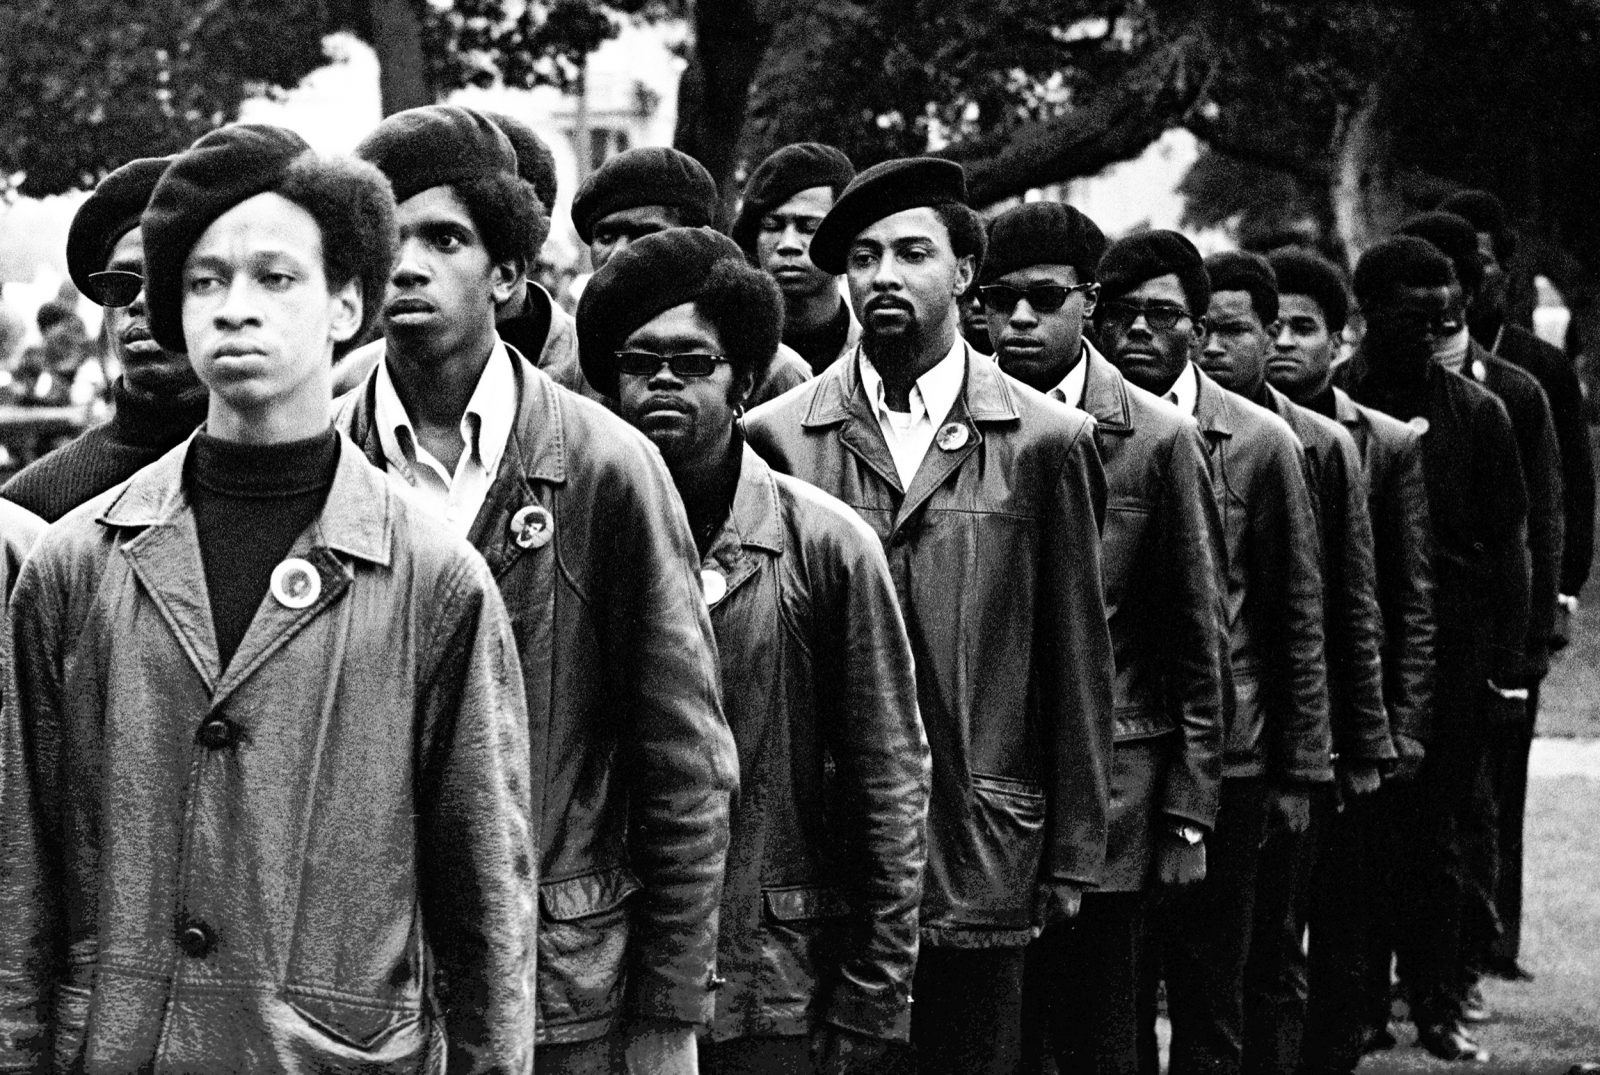 Panthers line up at a Free Huey rally in Defermery Park, in west Oakland‚Äôs ghetto. Light skinned man is Gregory Harrison. His brother, Oleander, went to Sacramento with Bobby & Huey. July 28, 1968